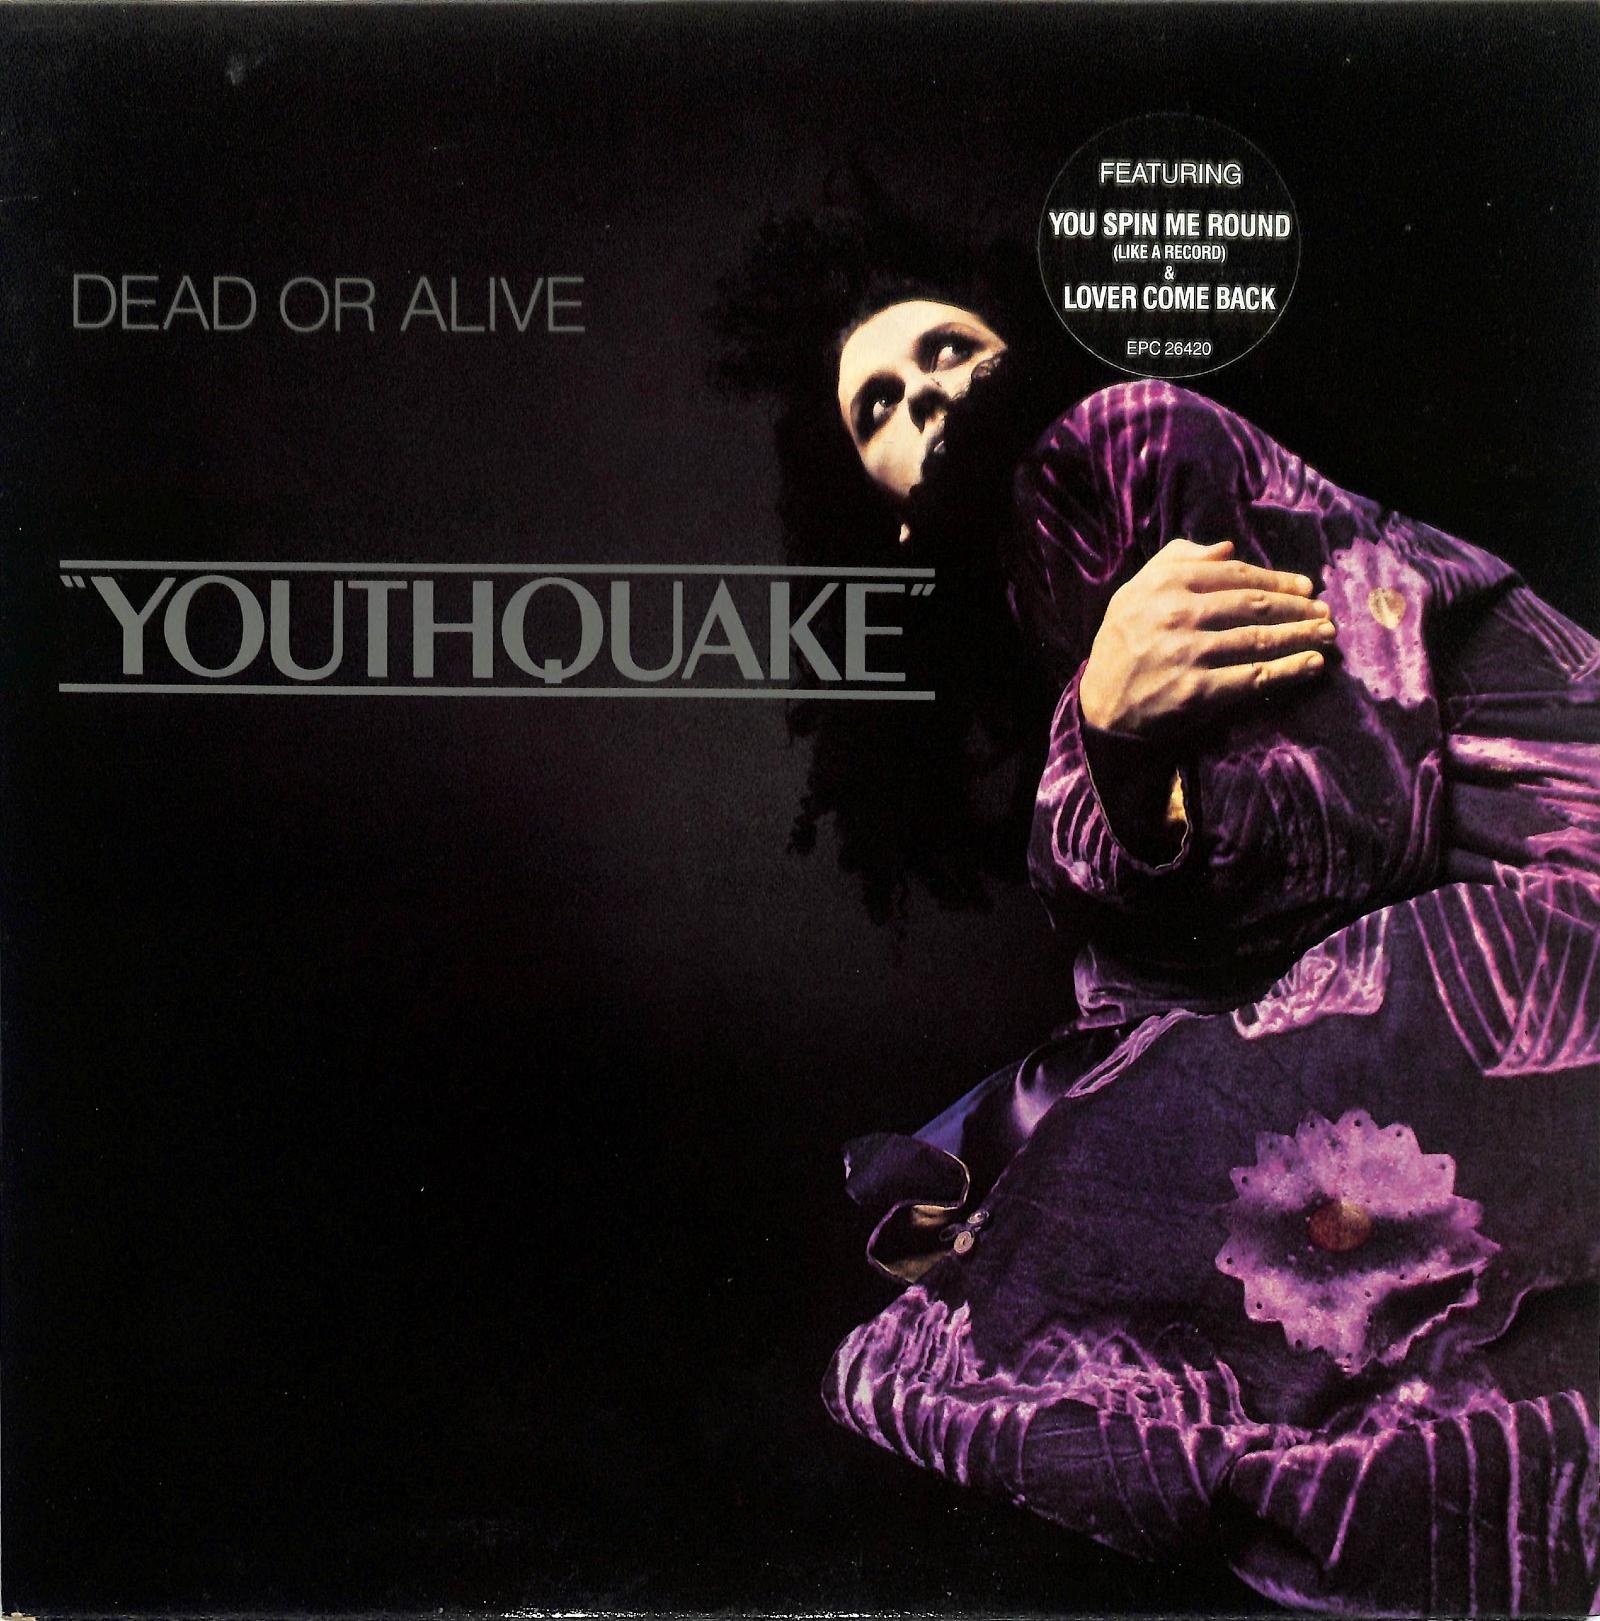 DEAD OR ALIVE - Youthquake